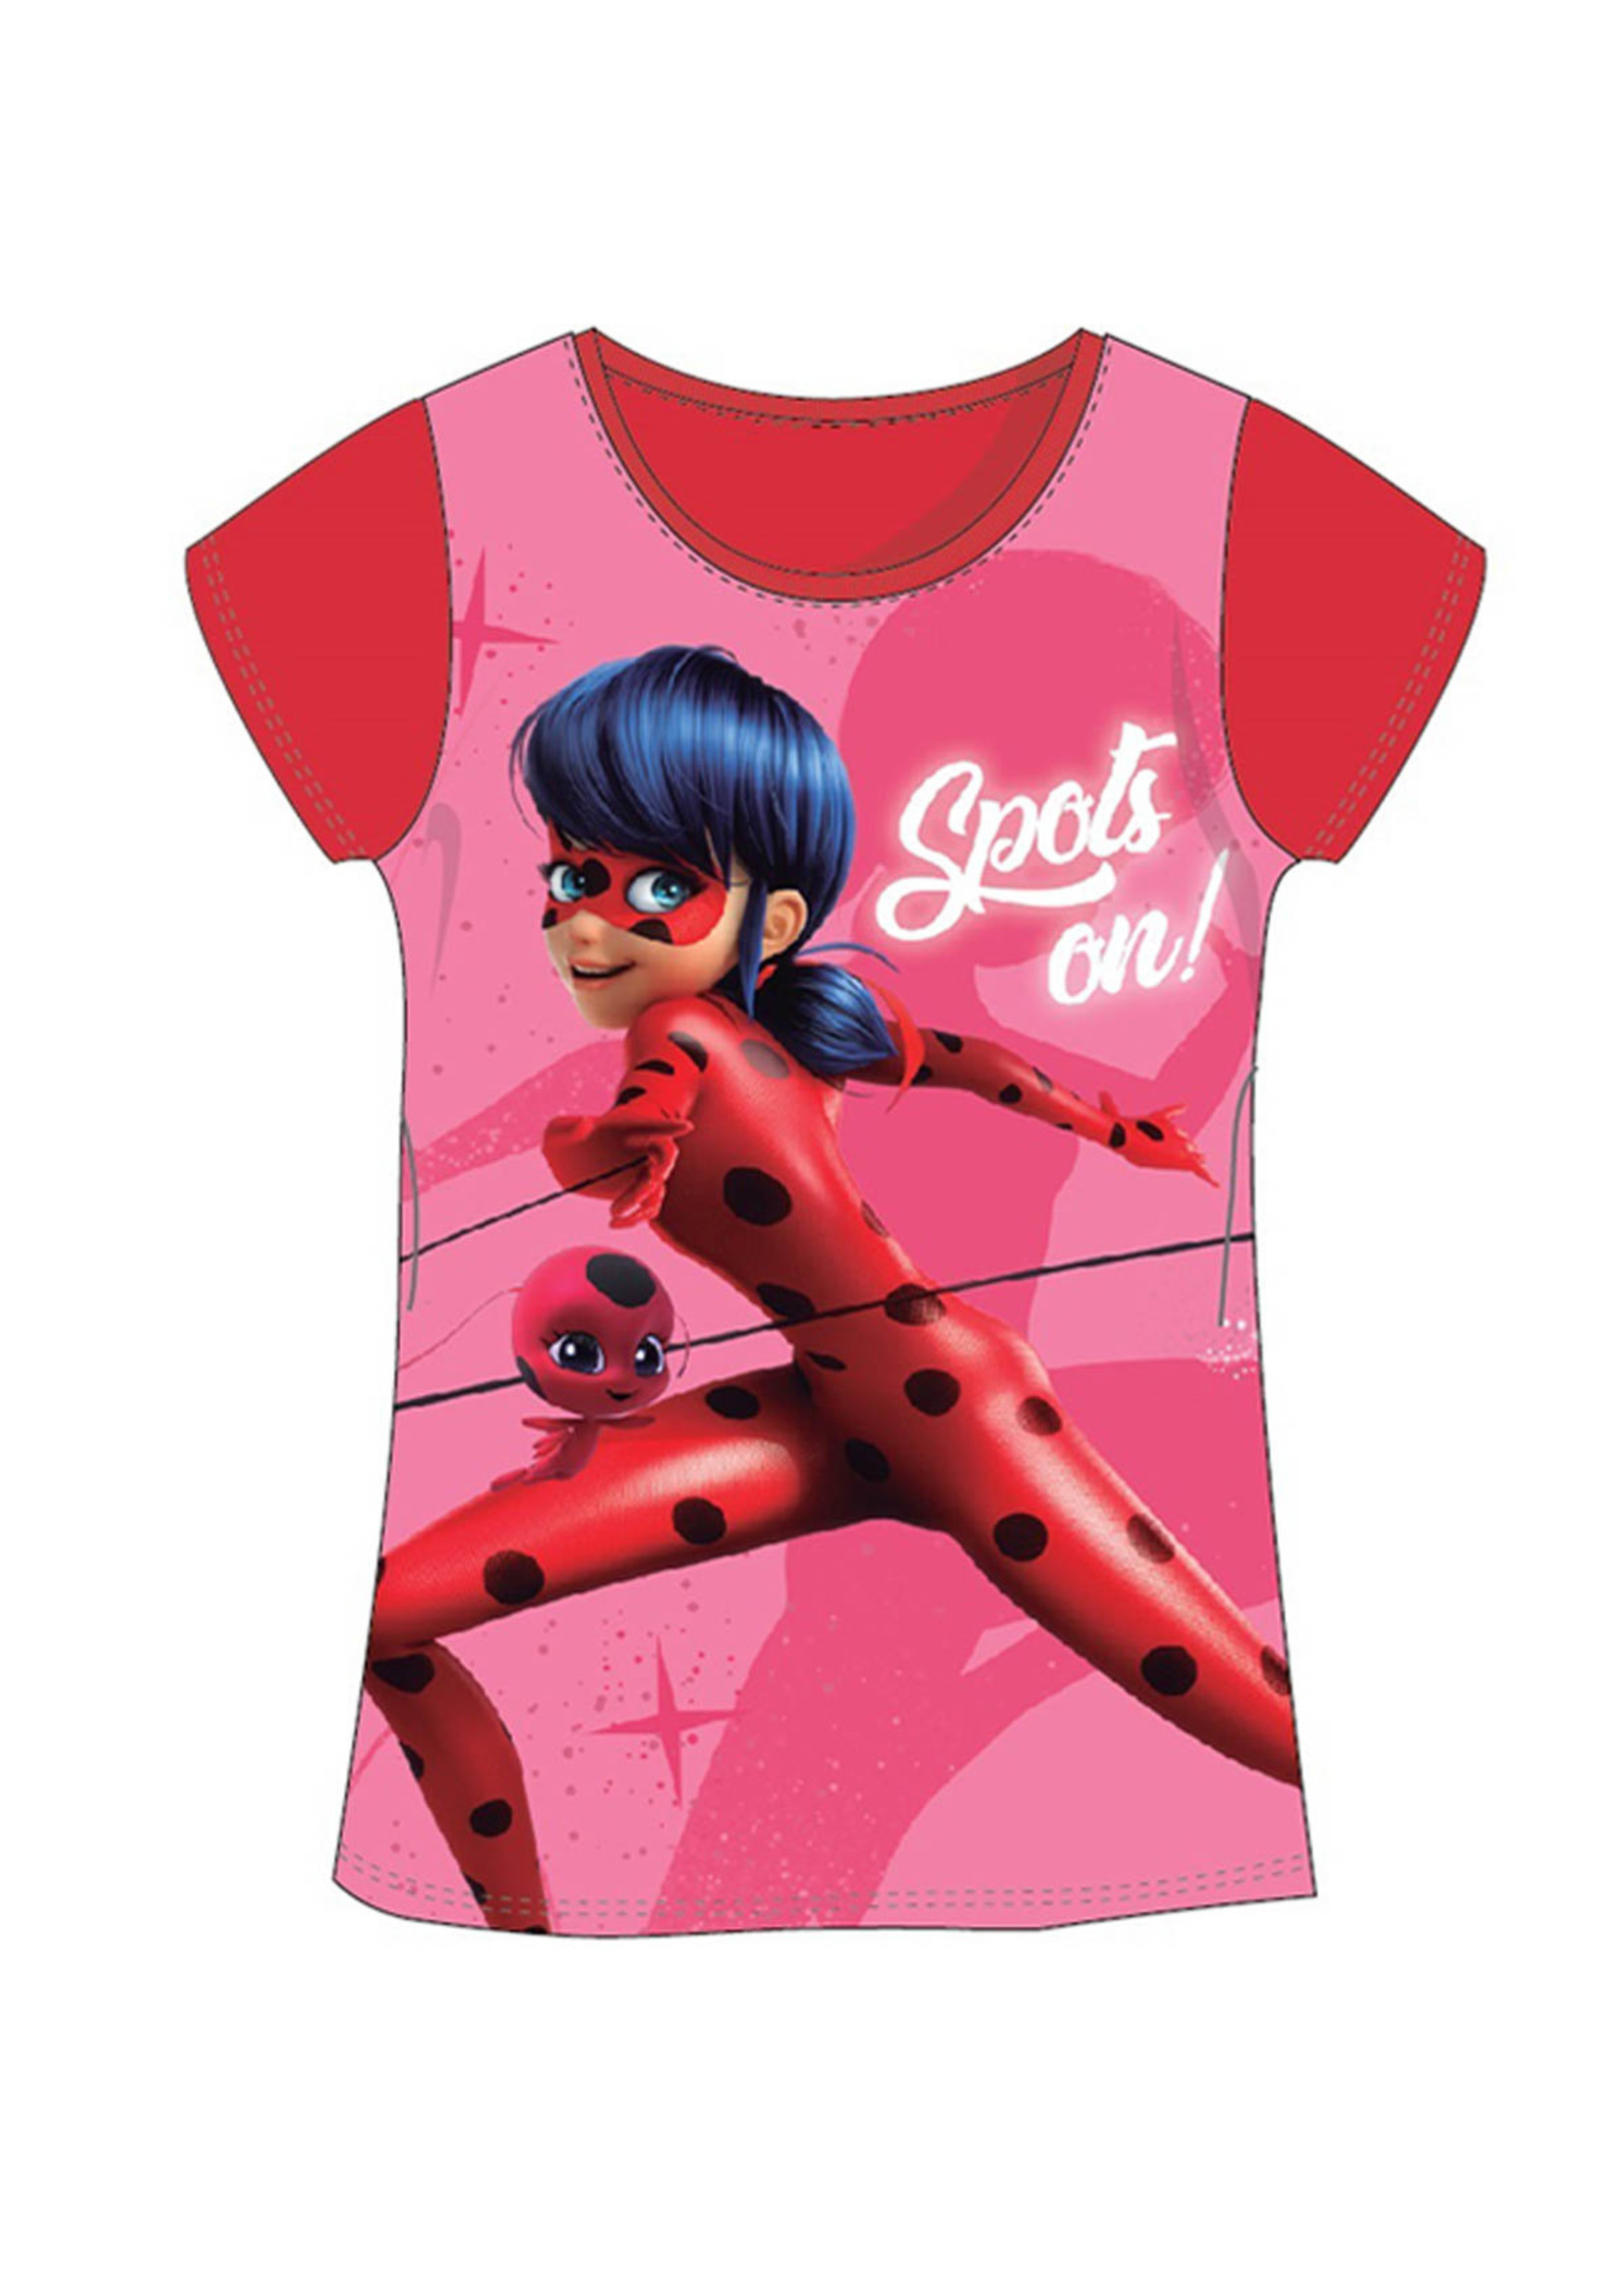 Miraculous Ladybug T-shirt from Miraculous red